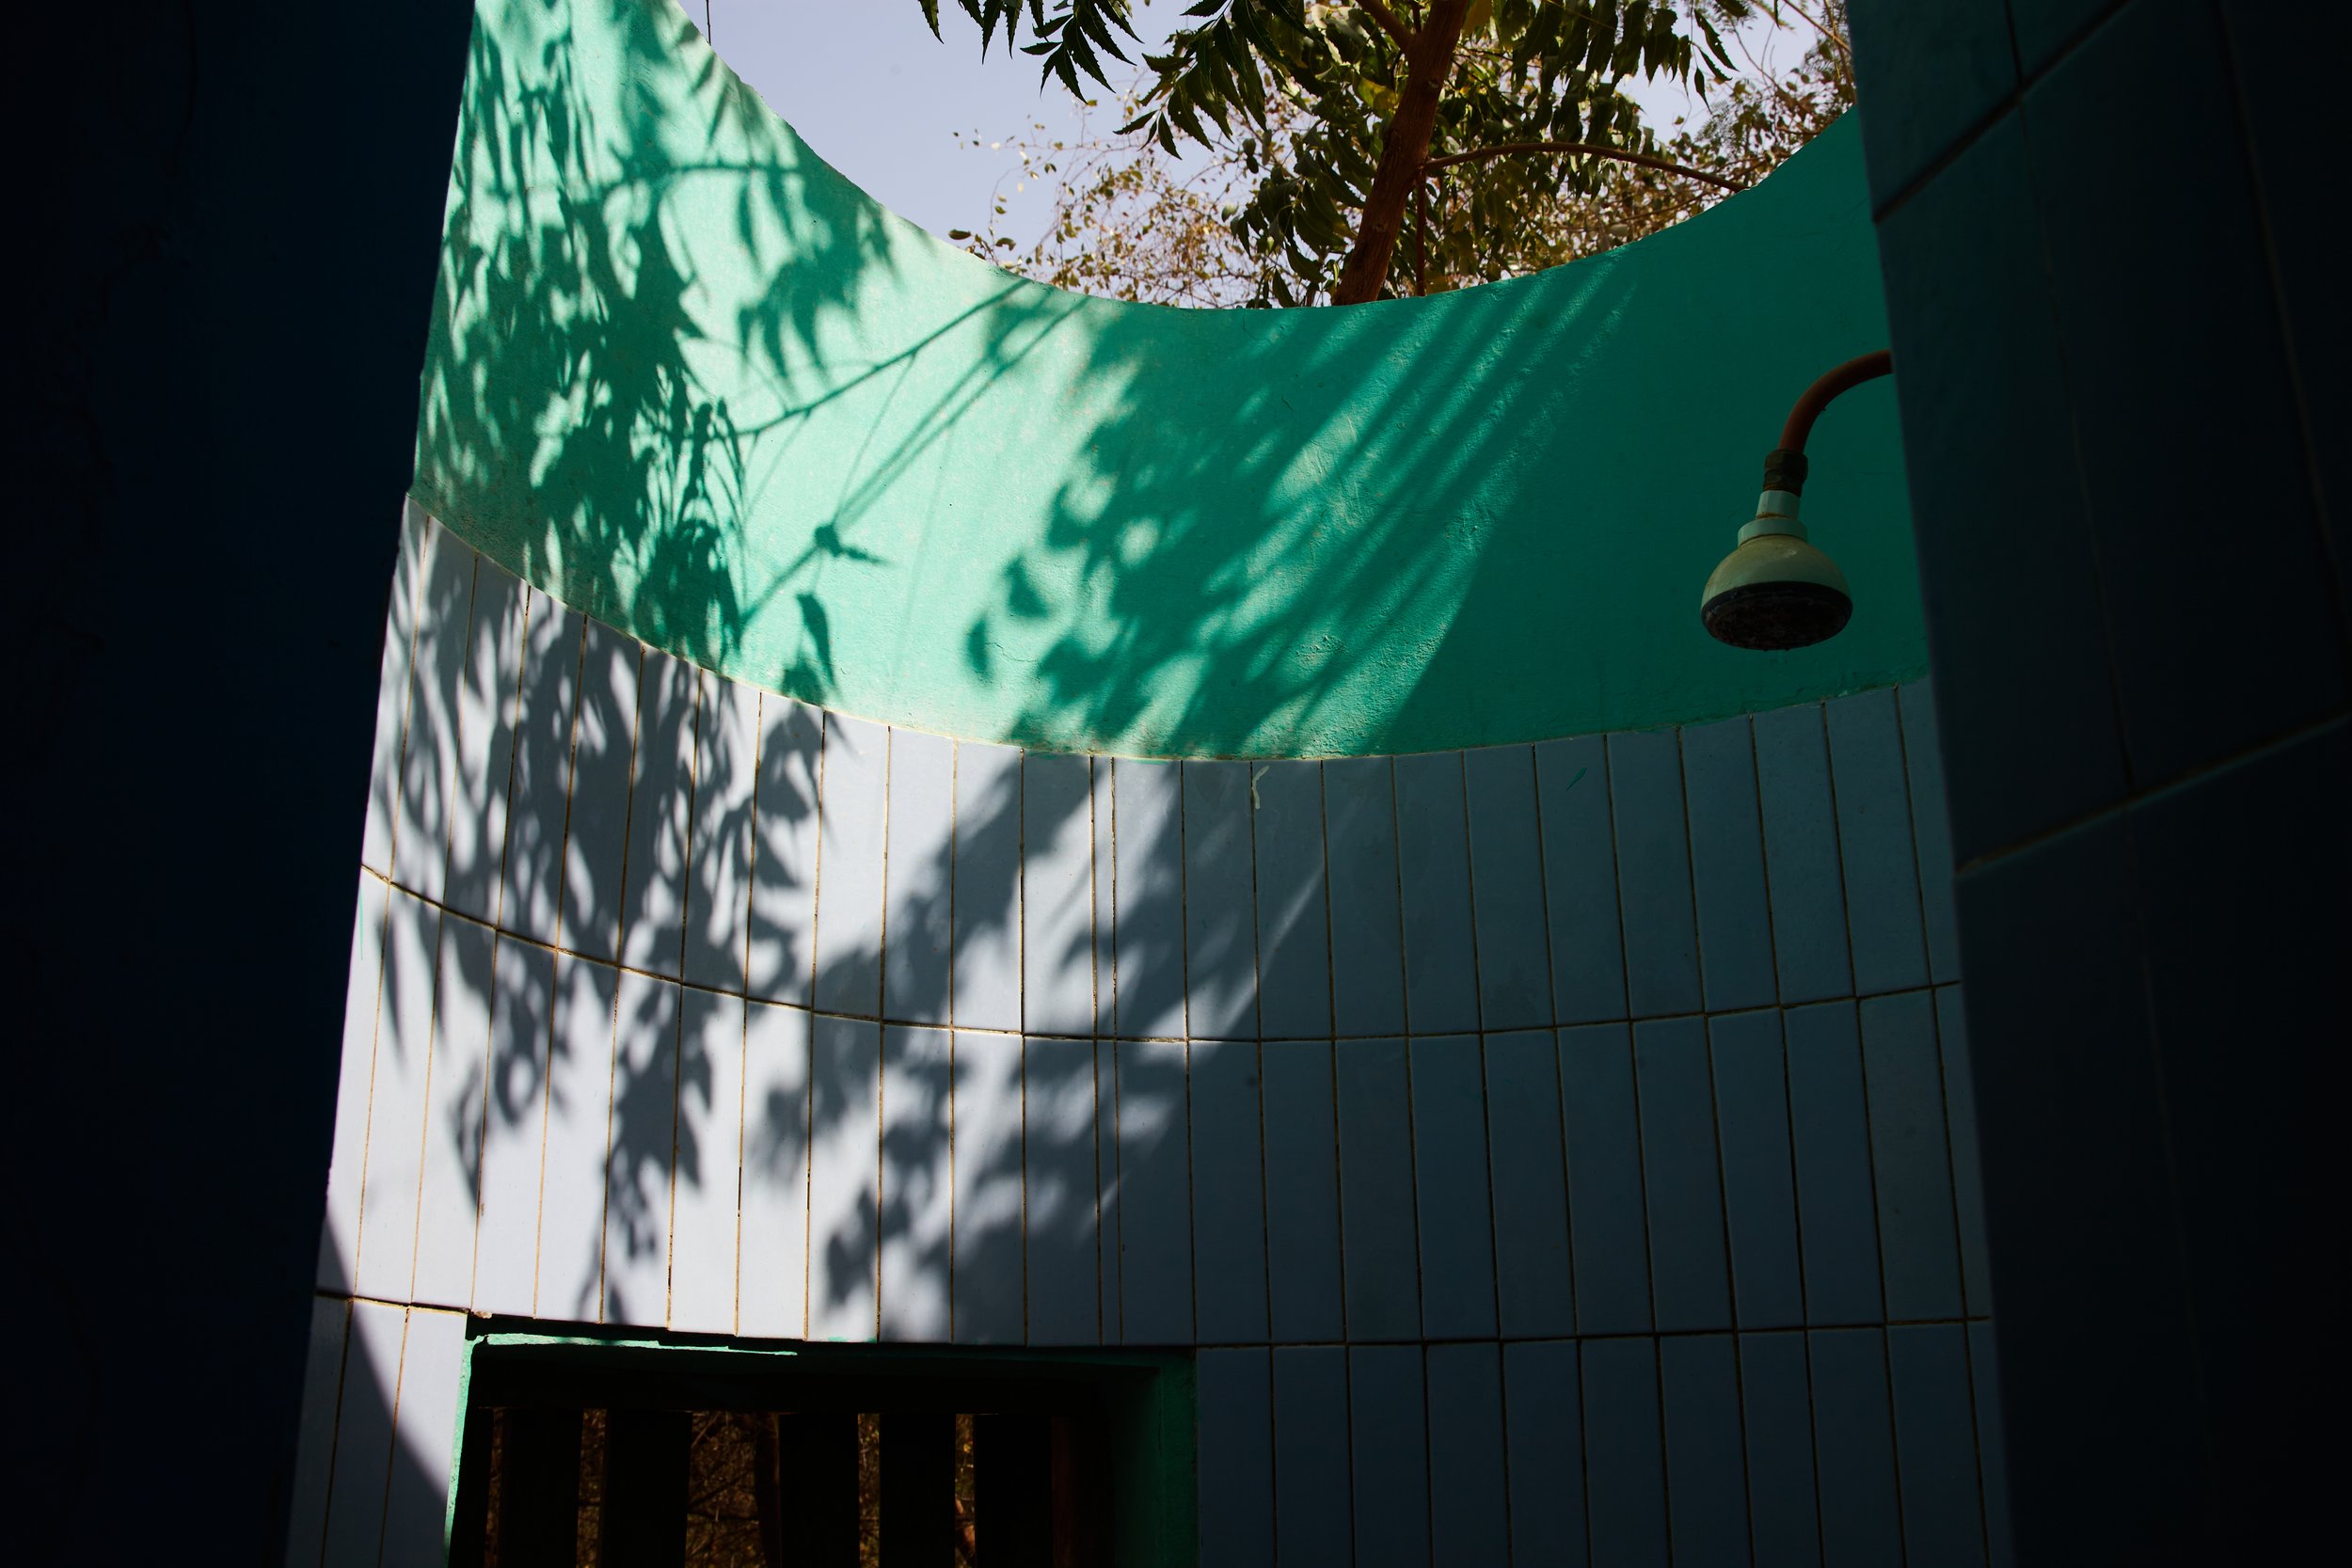 Photograph of shadows of trees on green and blue tiled wall inside an outside shower at Ecoles Des Sables taken by photographer Hatty Frances Bell